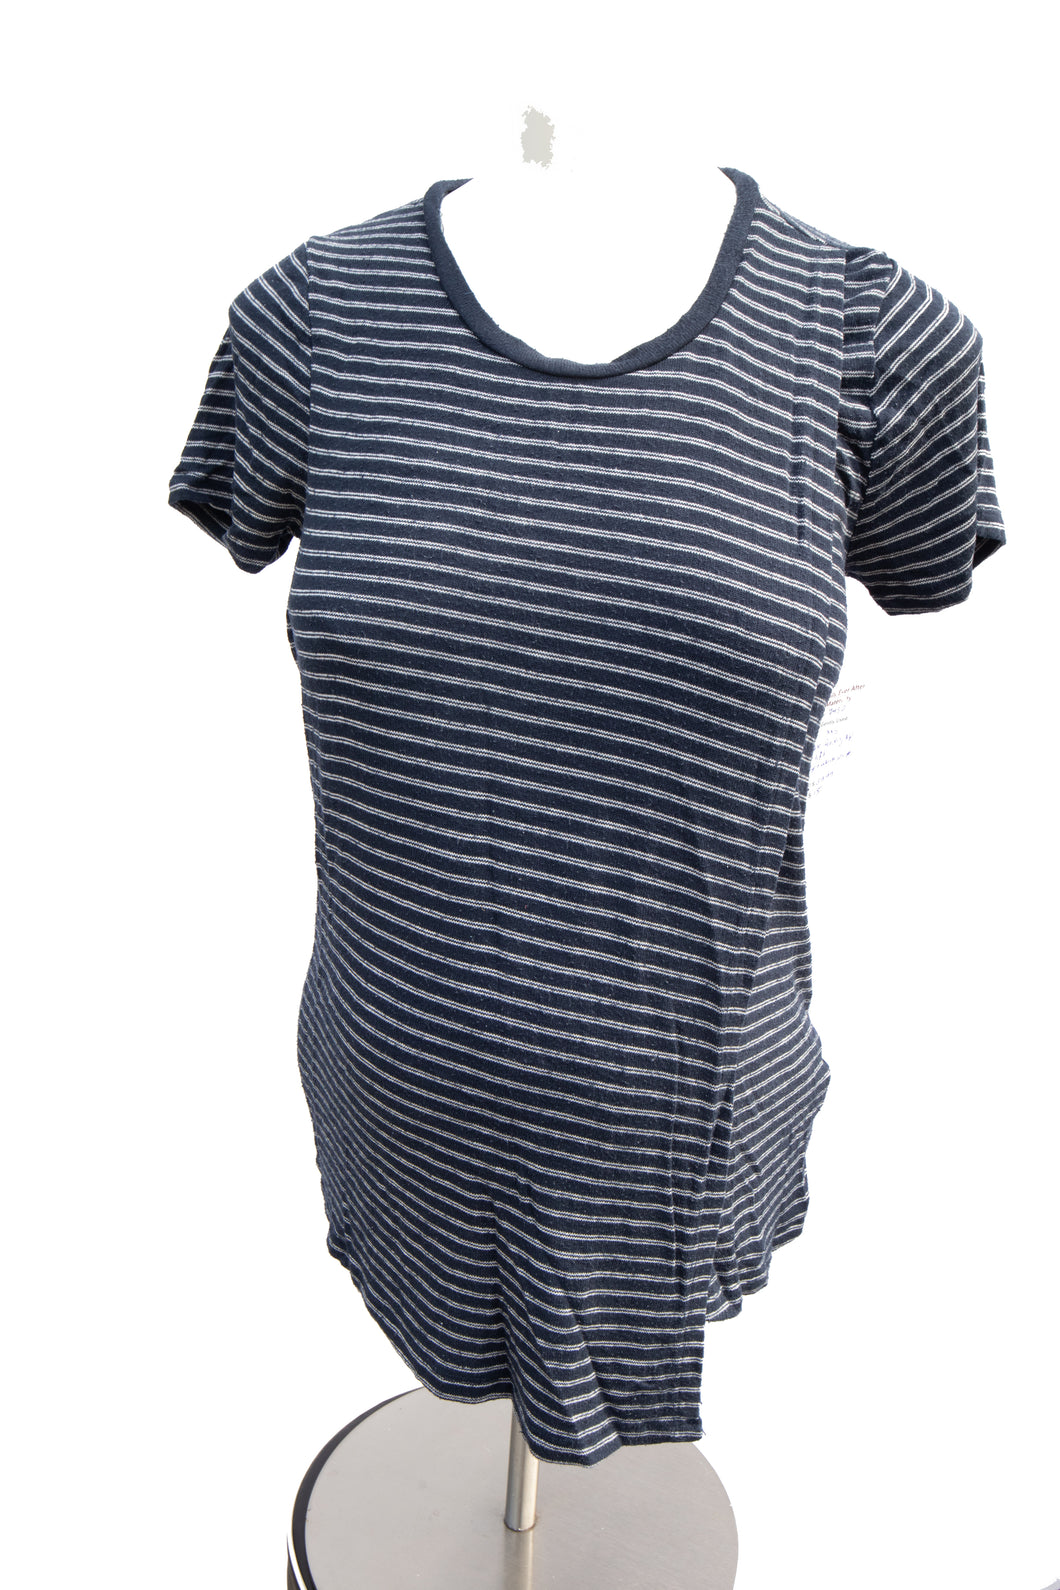 XS Thyme Feeding top in Navy and white stripe